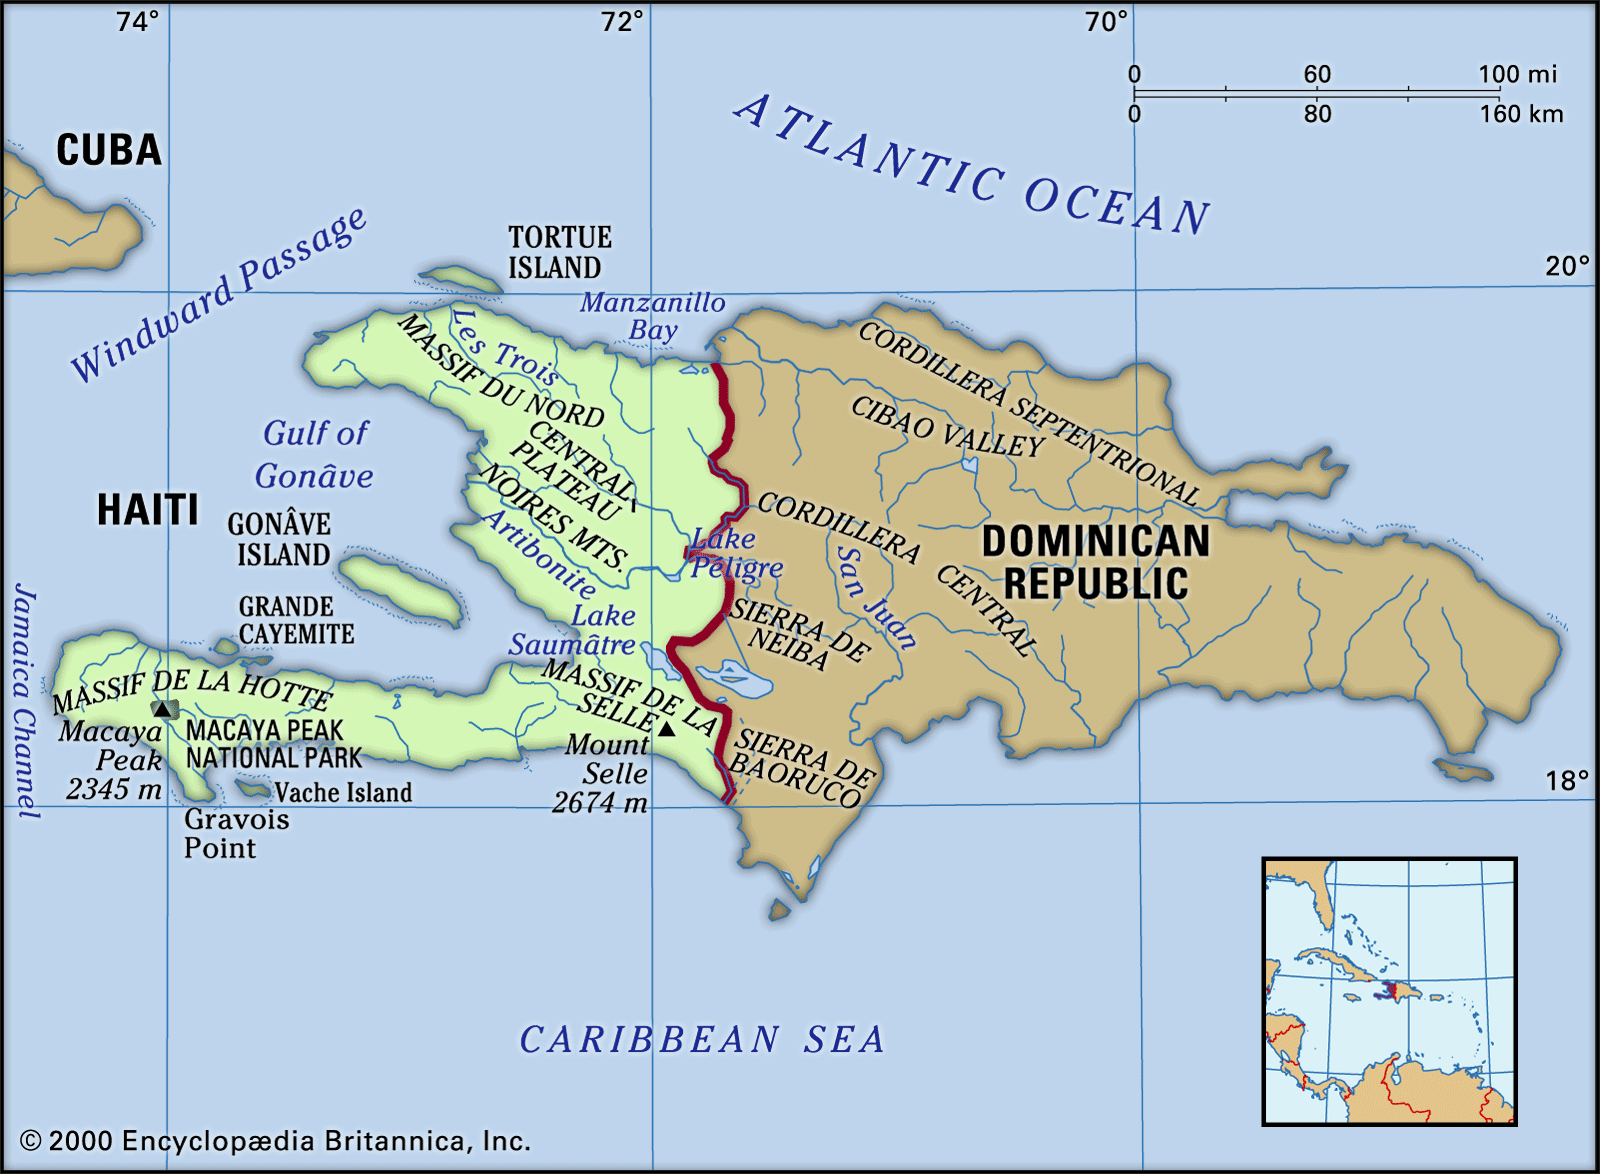 A map of the island of Hispanola, which is split in the middle and labeled Haiti on the west side and Dominican Republic on the east.